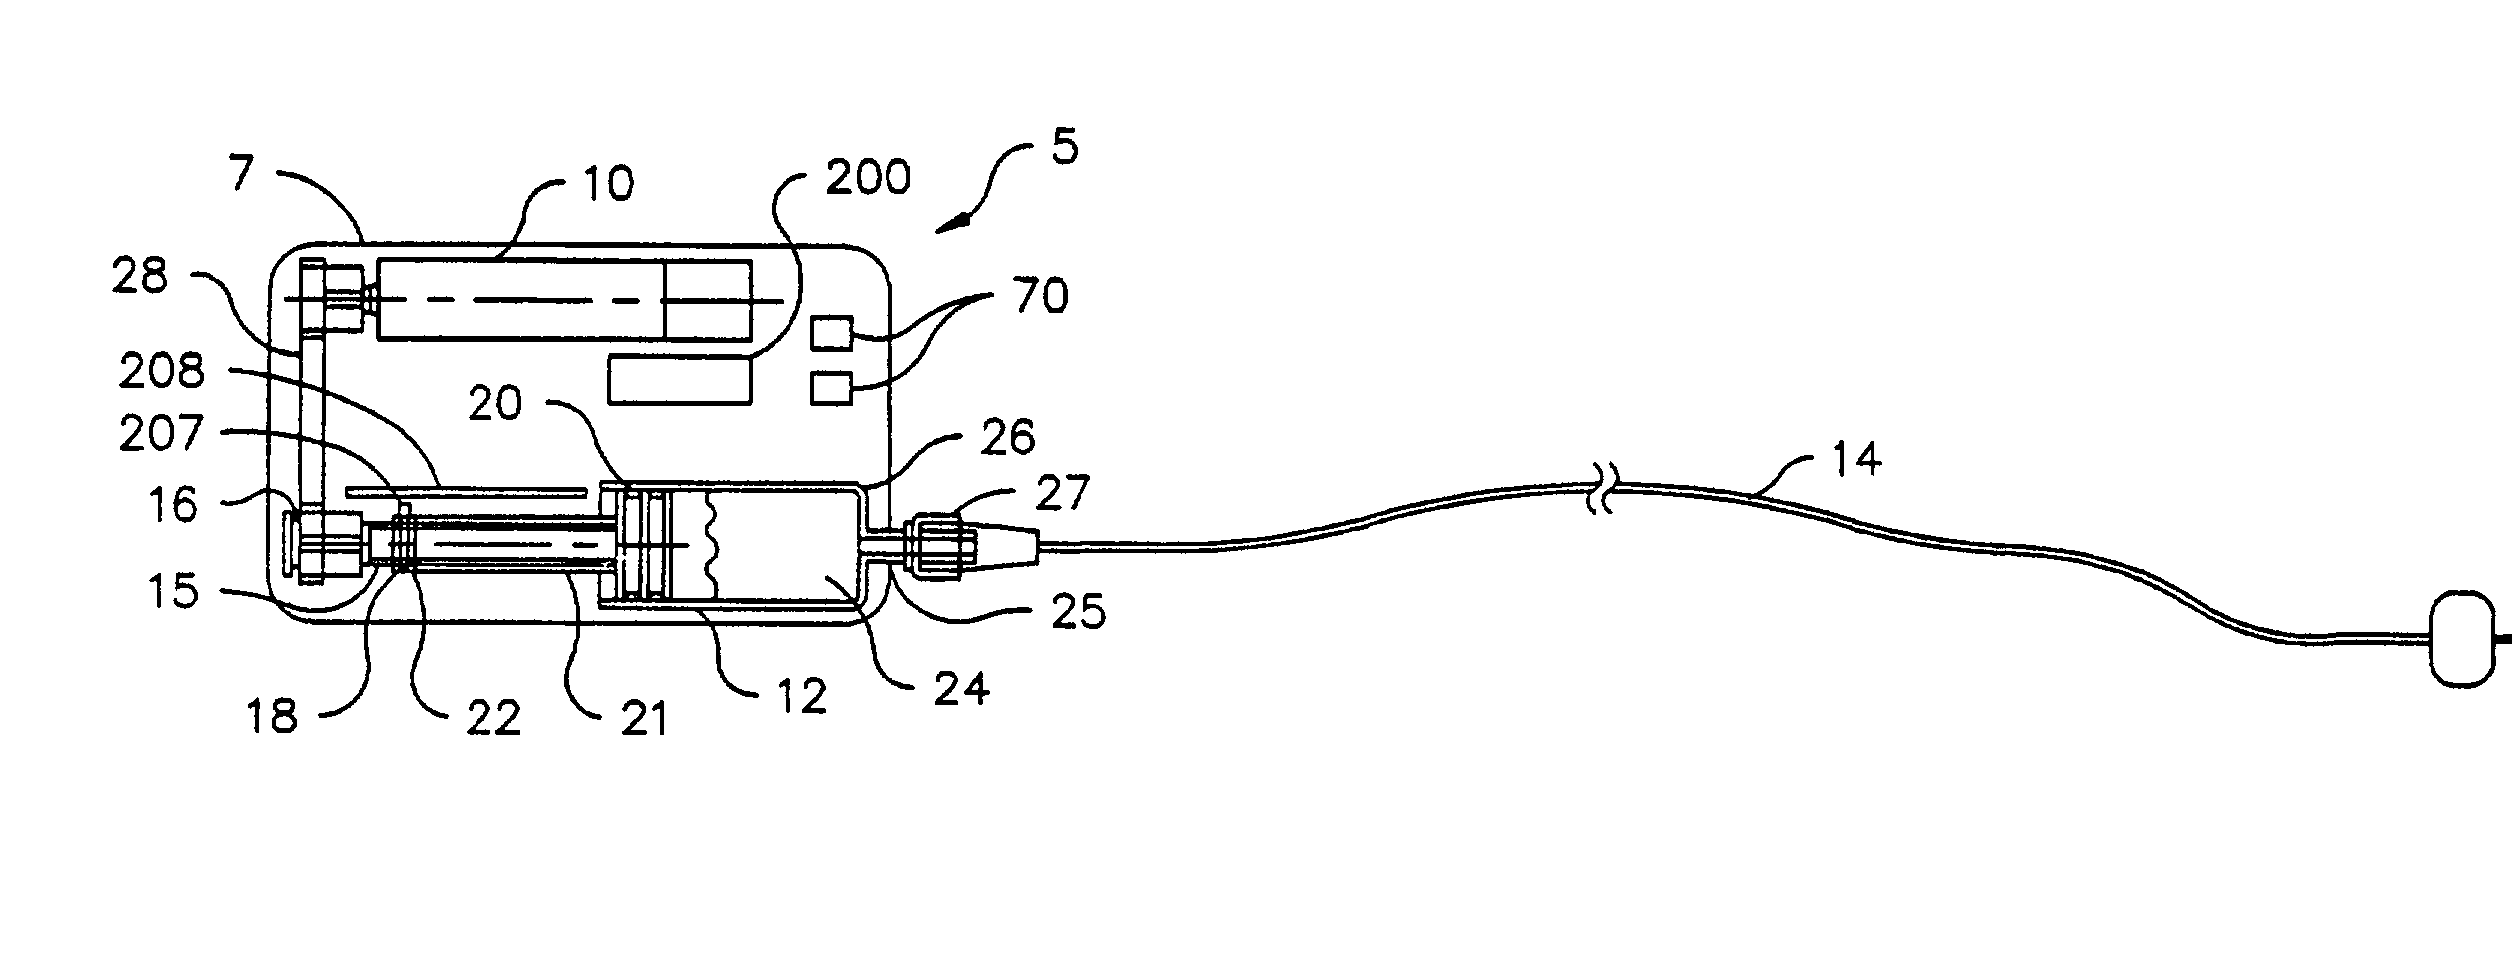 Infusion pump with a sealed drive mechanism and improved method of occlusion detection